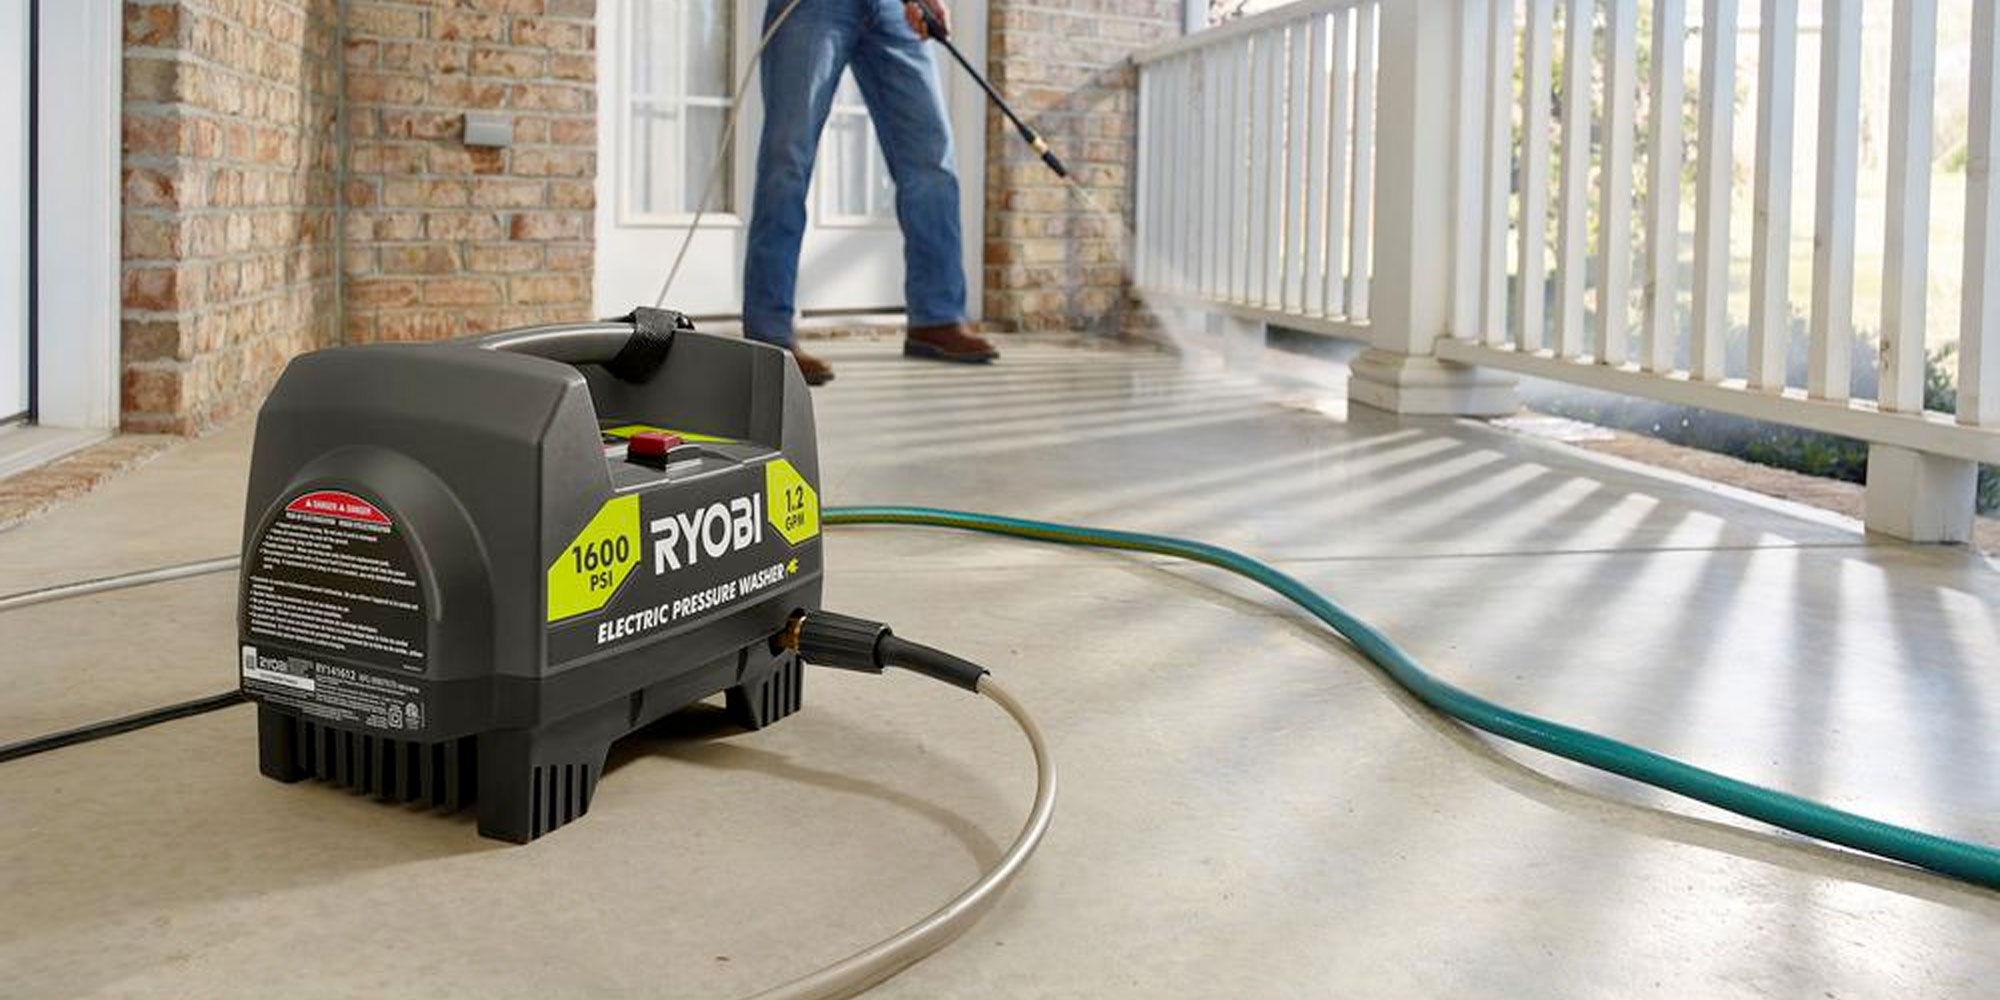 Ryobi's reconditioned 1600 PSI electric pressure washer is 60 (Orig